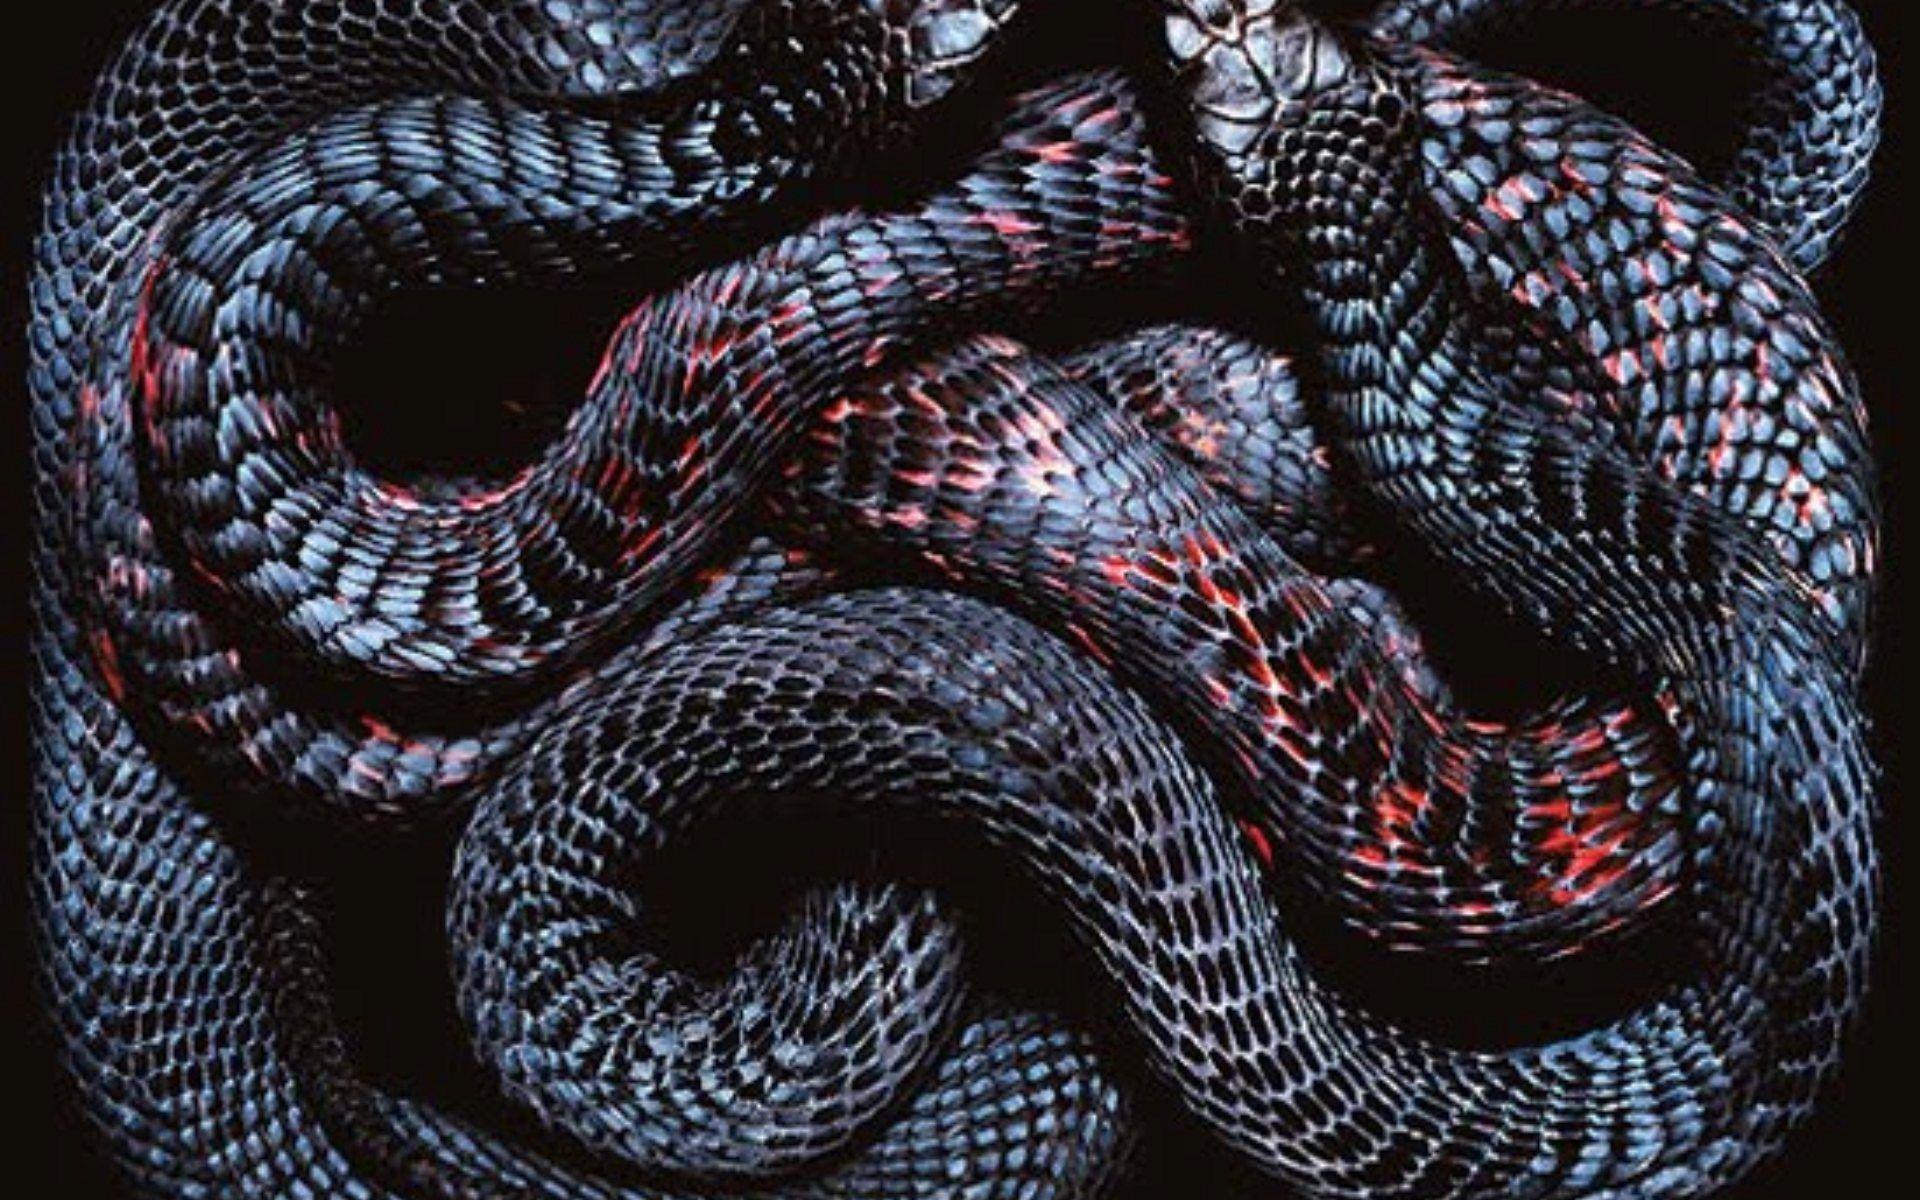 A black snake with red and blue scales - Snake